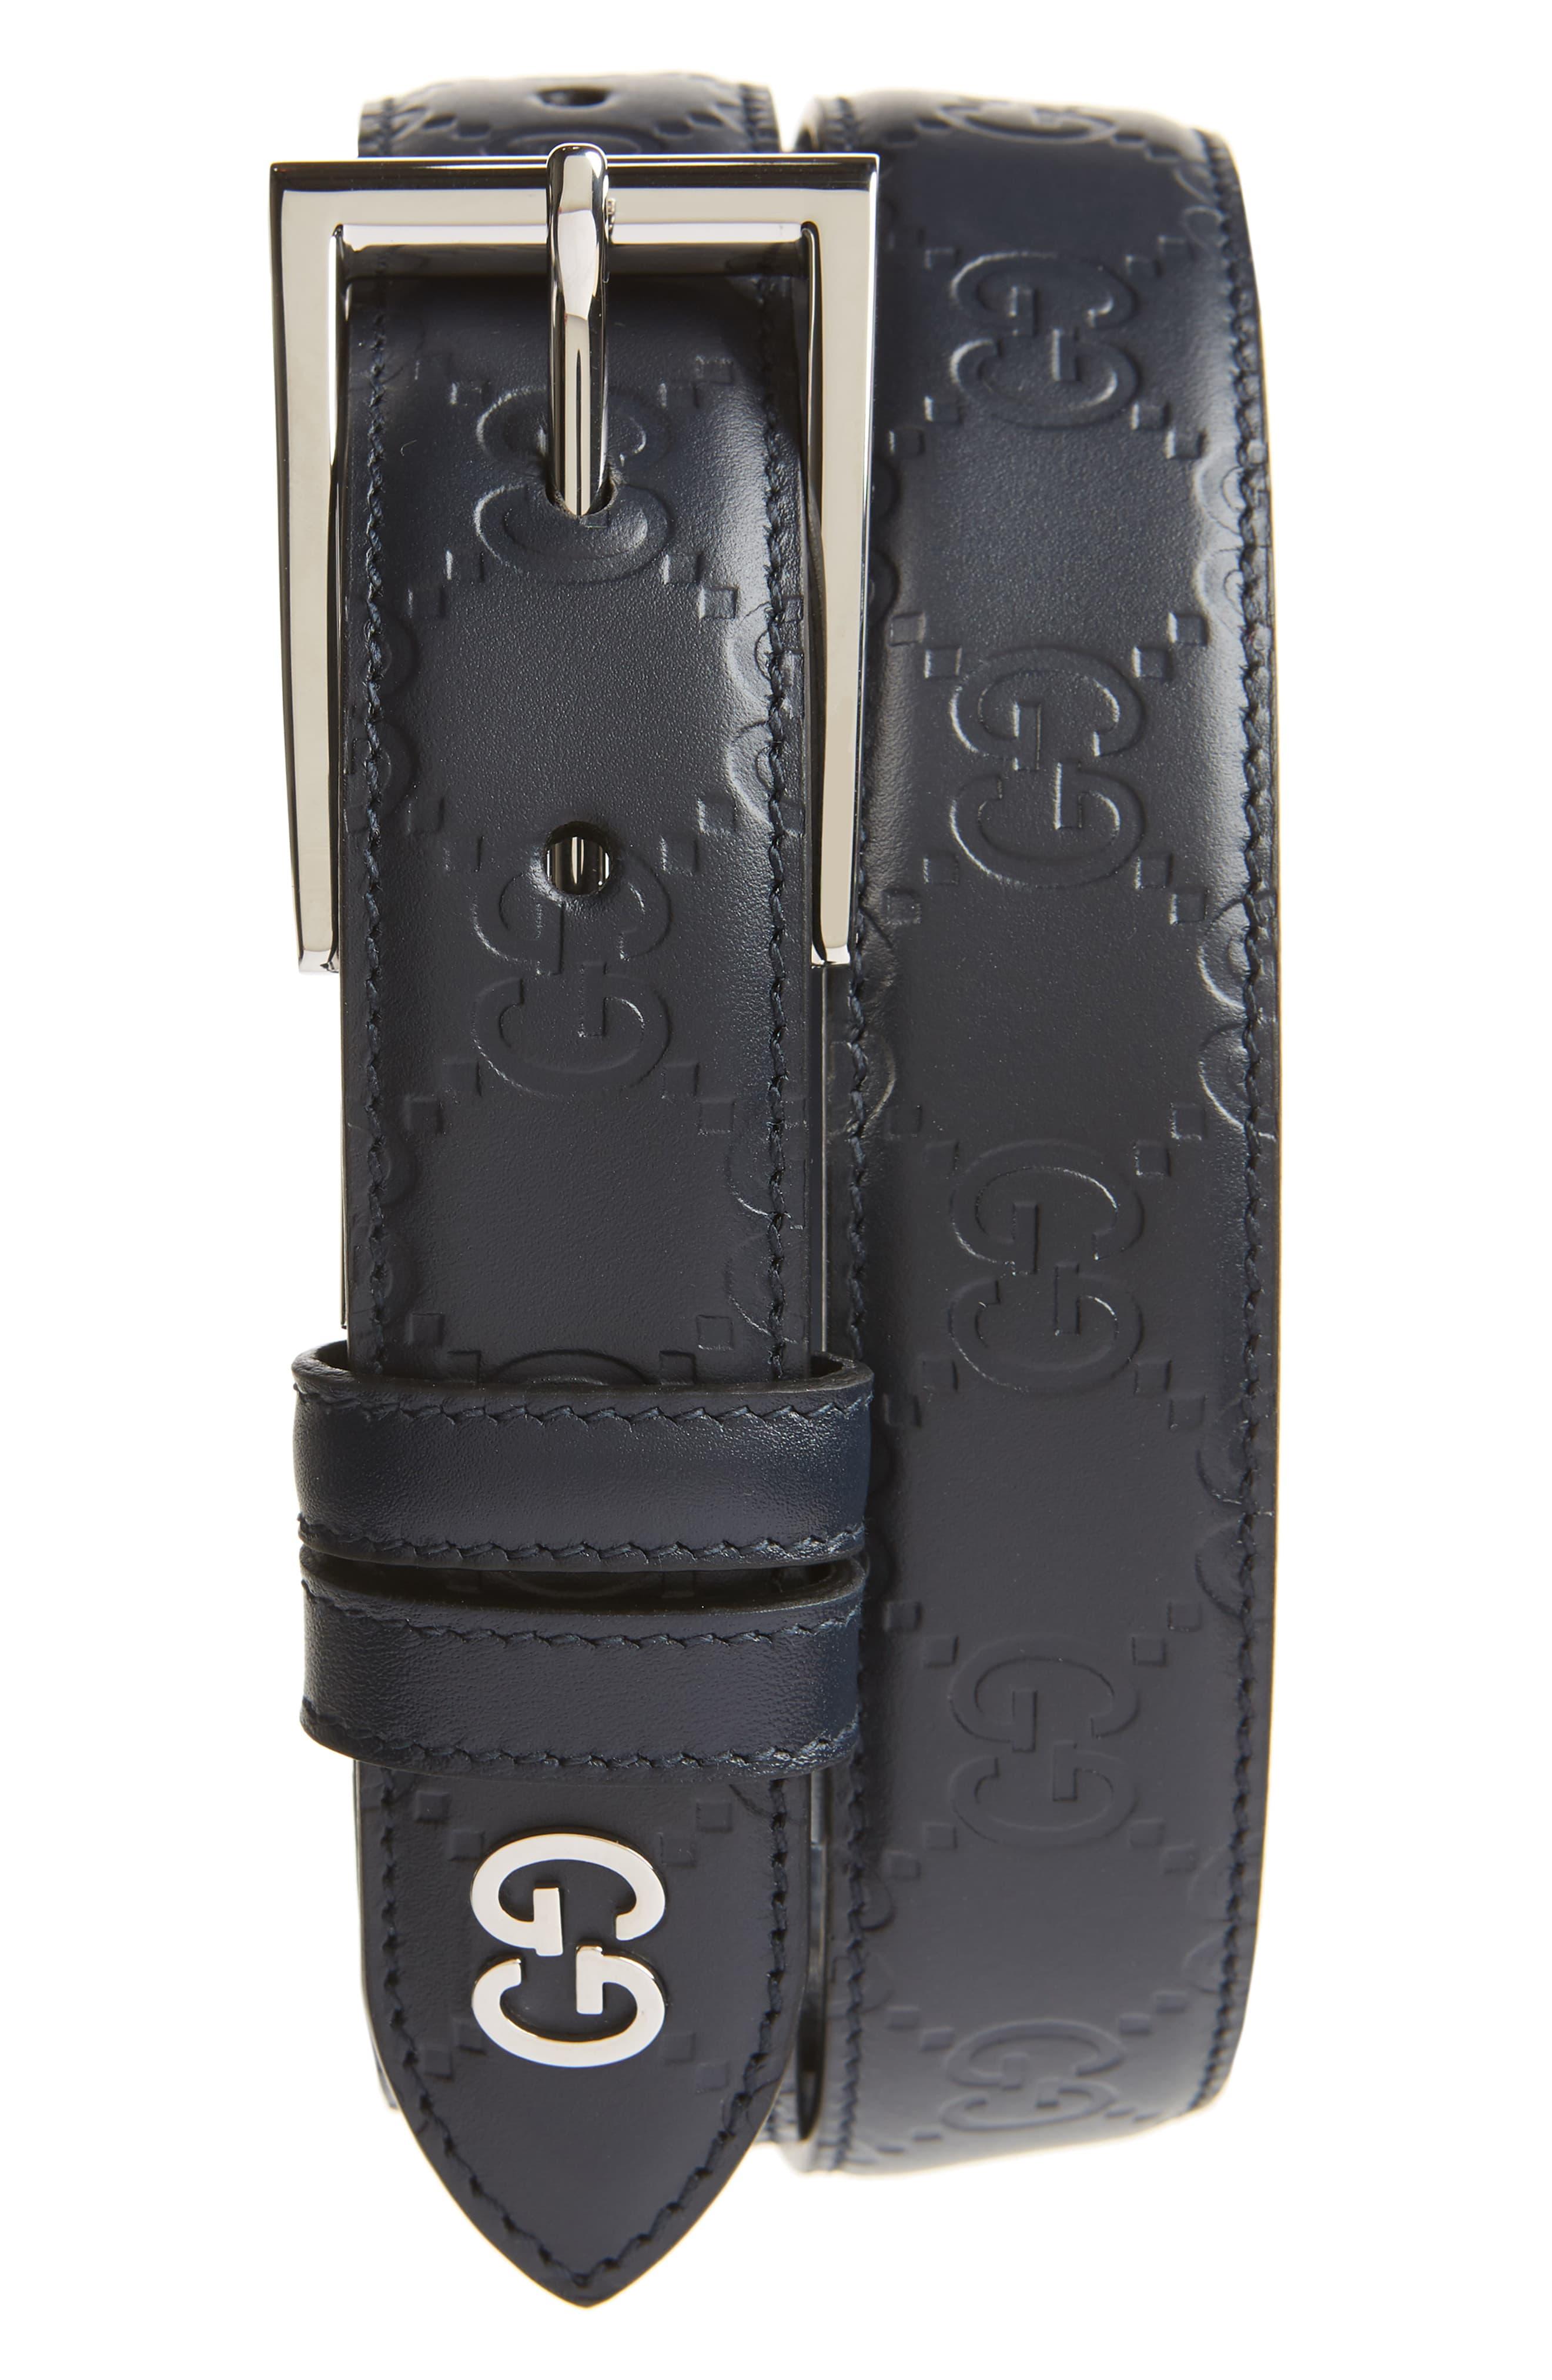 Gucci Reversible Signature Leather Belt in Black for Men - Lyst